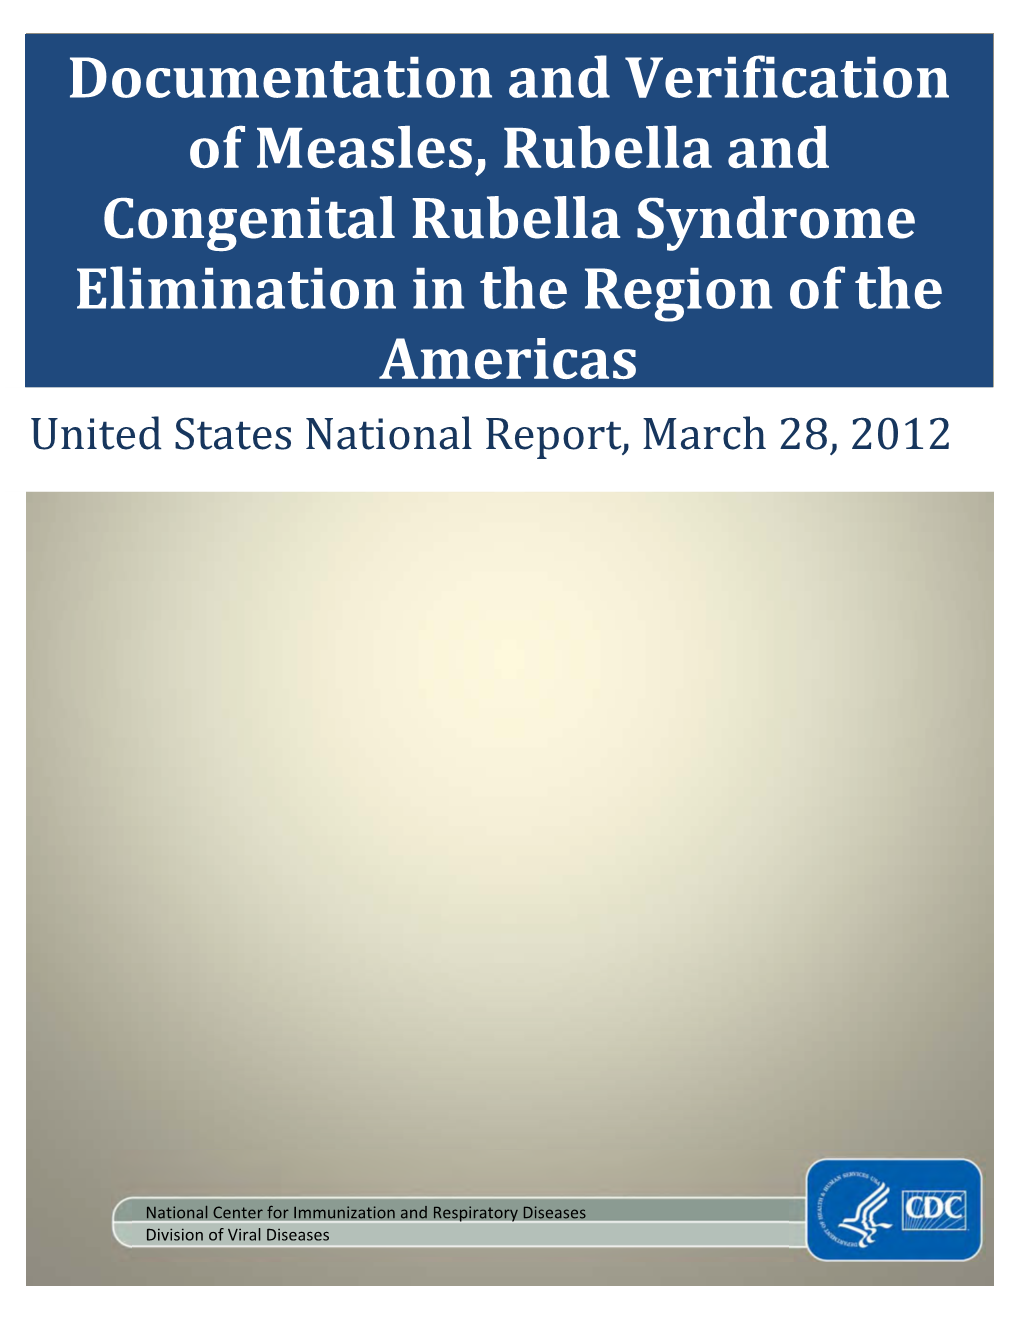 Documentation and Verification of Measles, Rubella and Congenital